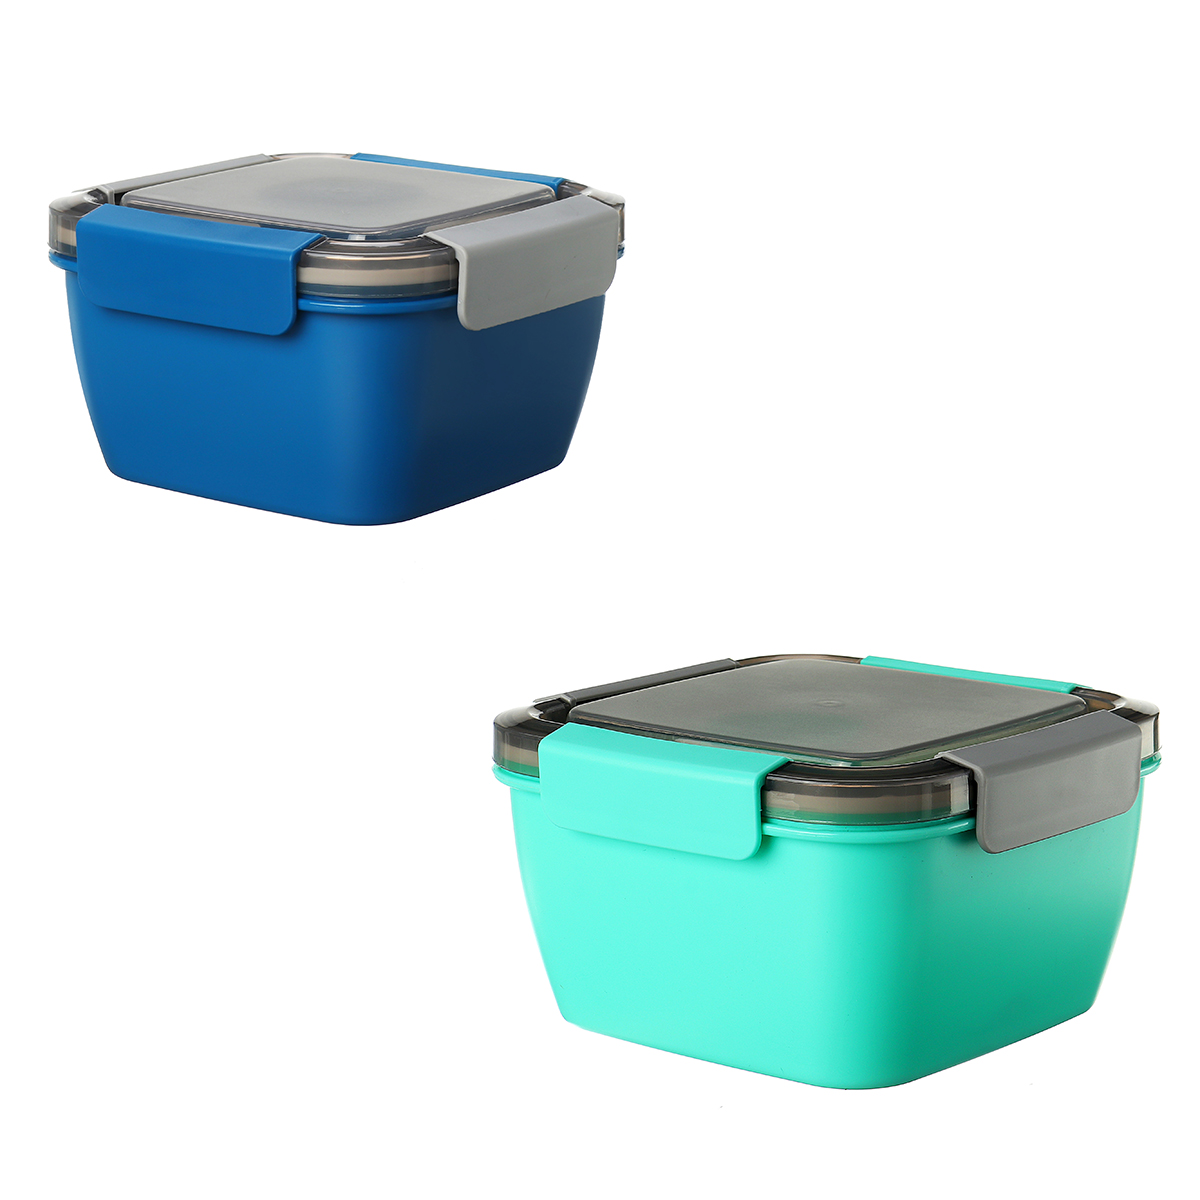 Portable-Sealed-Divider-Bento-Lunch-Box-Container-Leak-Proof-Food-Stroage-Case-Camping-BBQ-Tableware-1565575-3